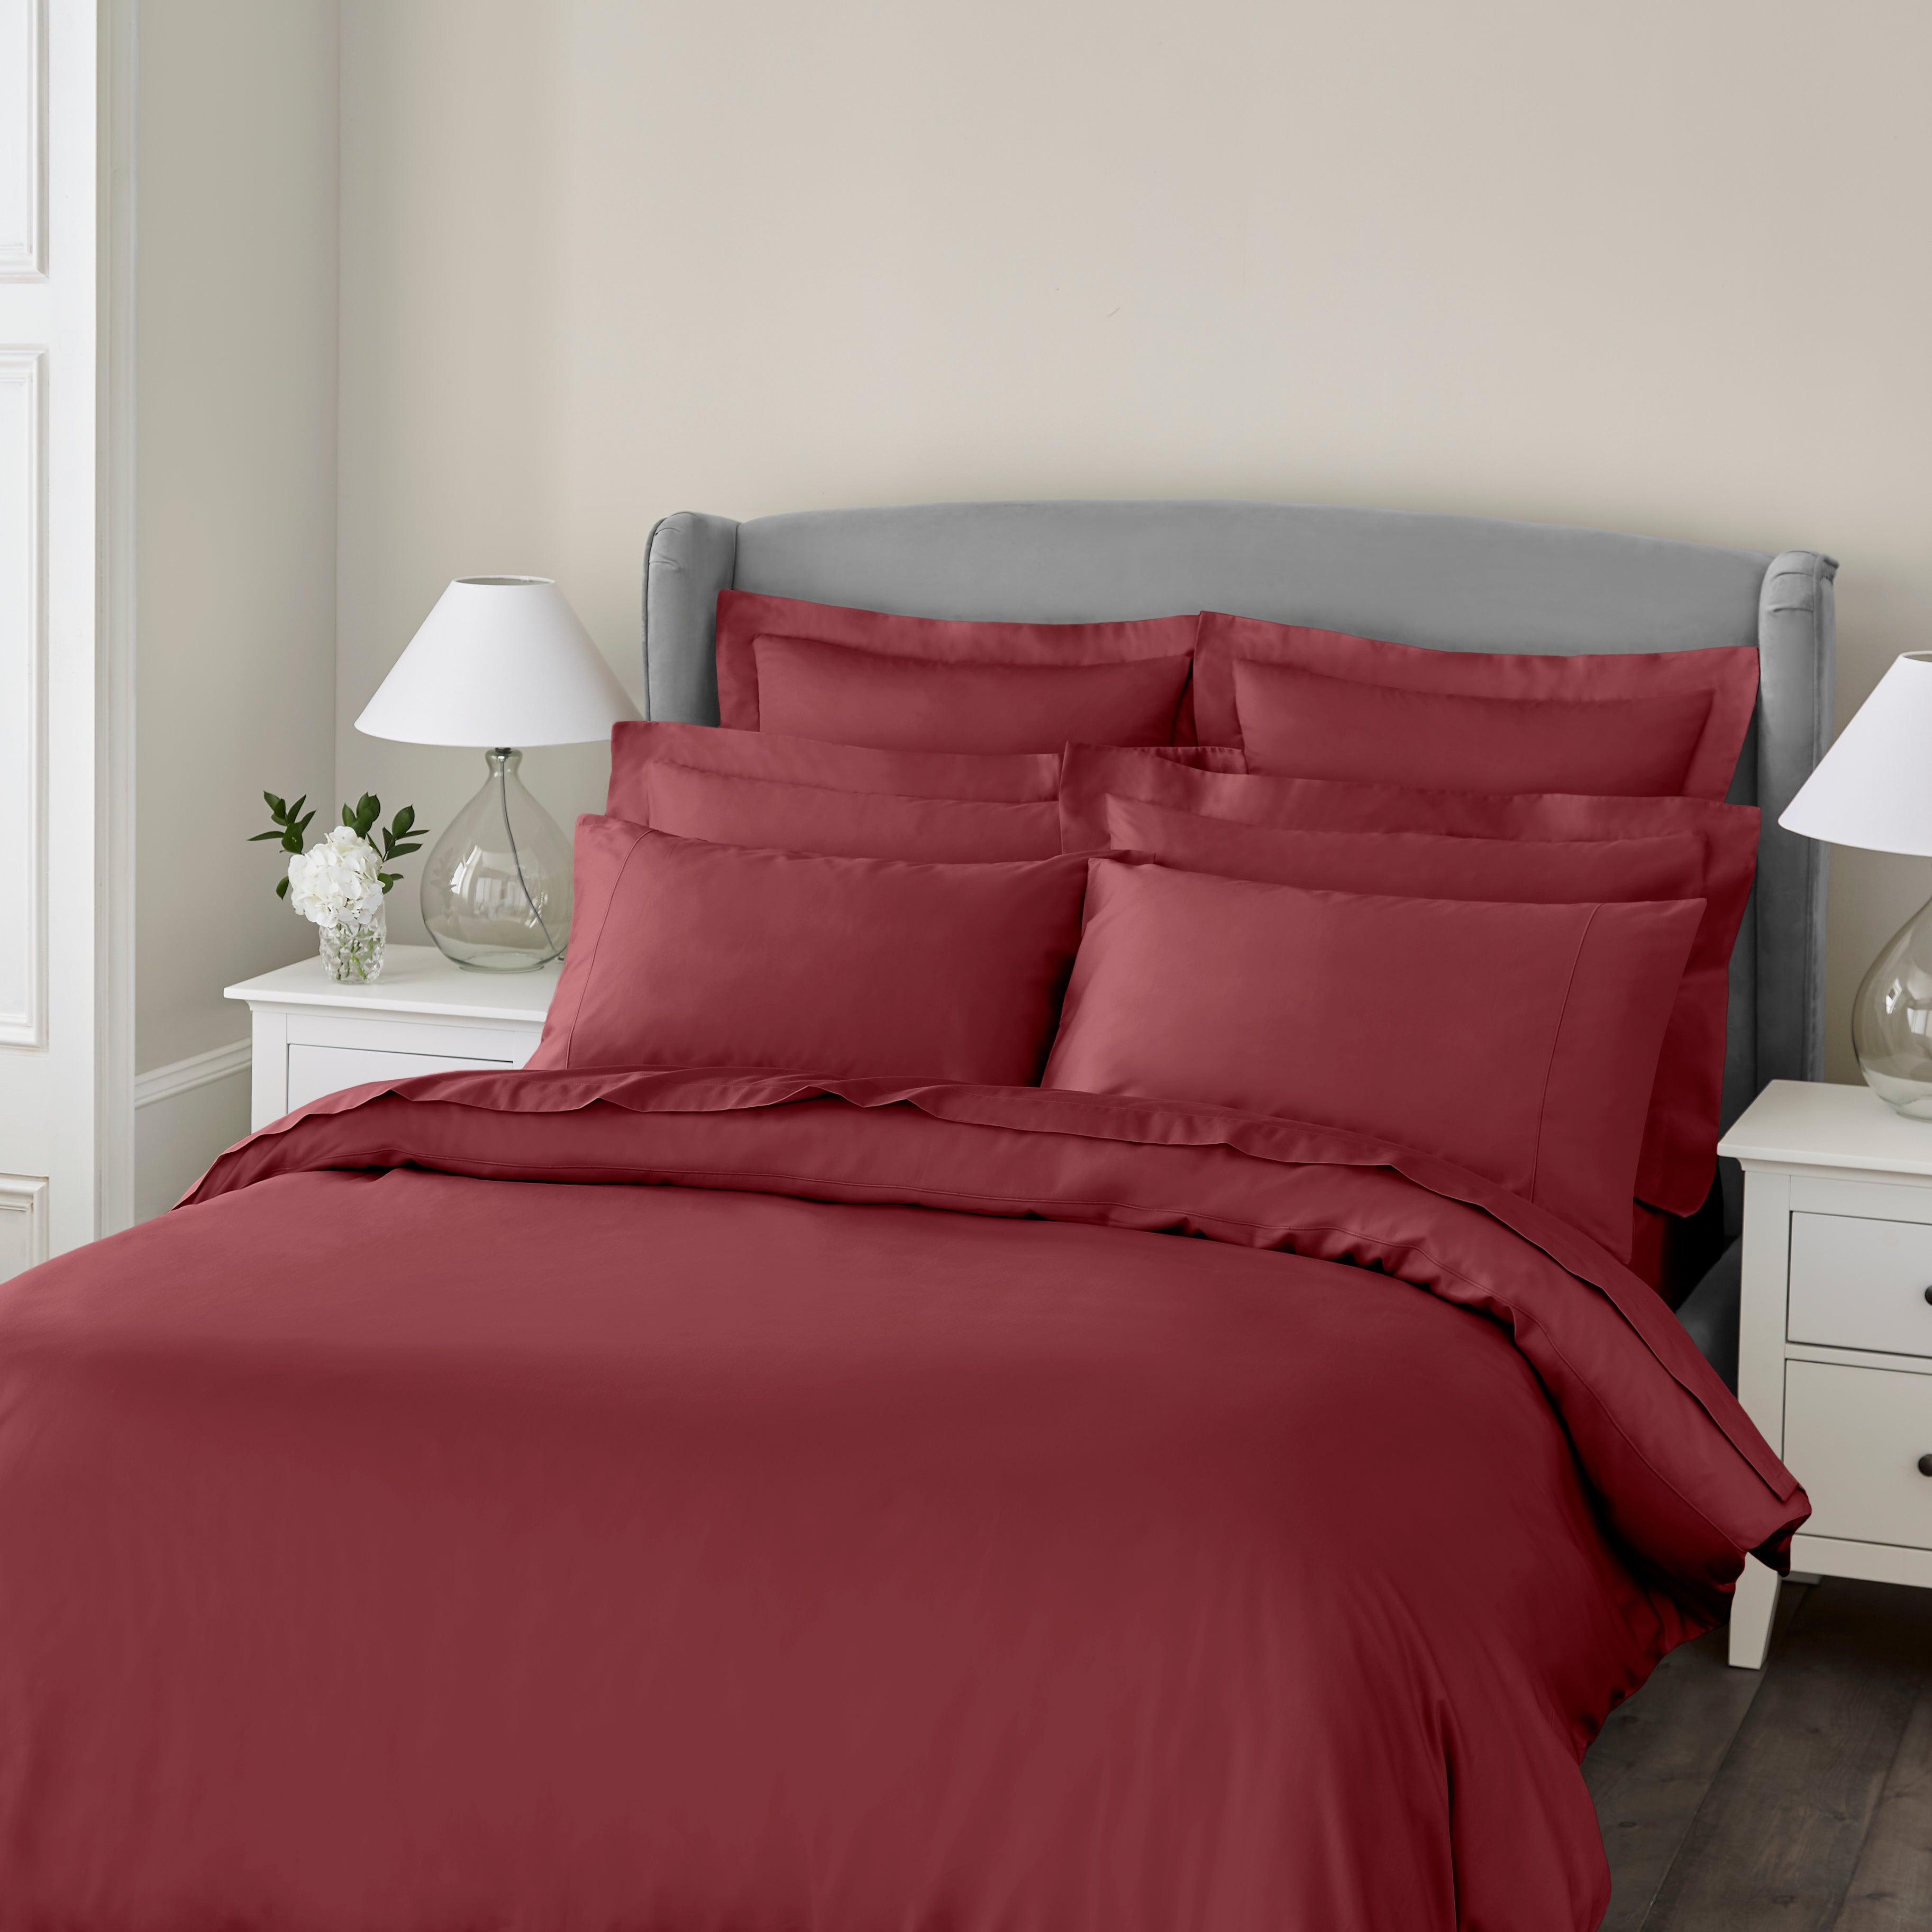 Dorma Egyptian Cotton 400 Thread Count Percale Duvet Cover Red Red